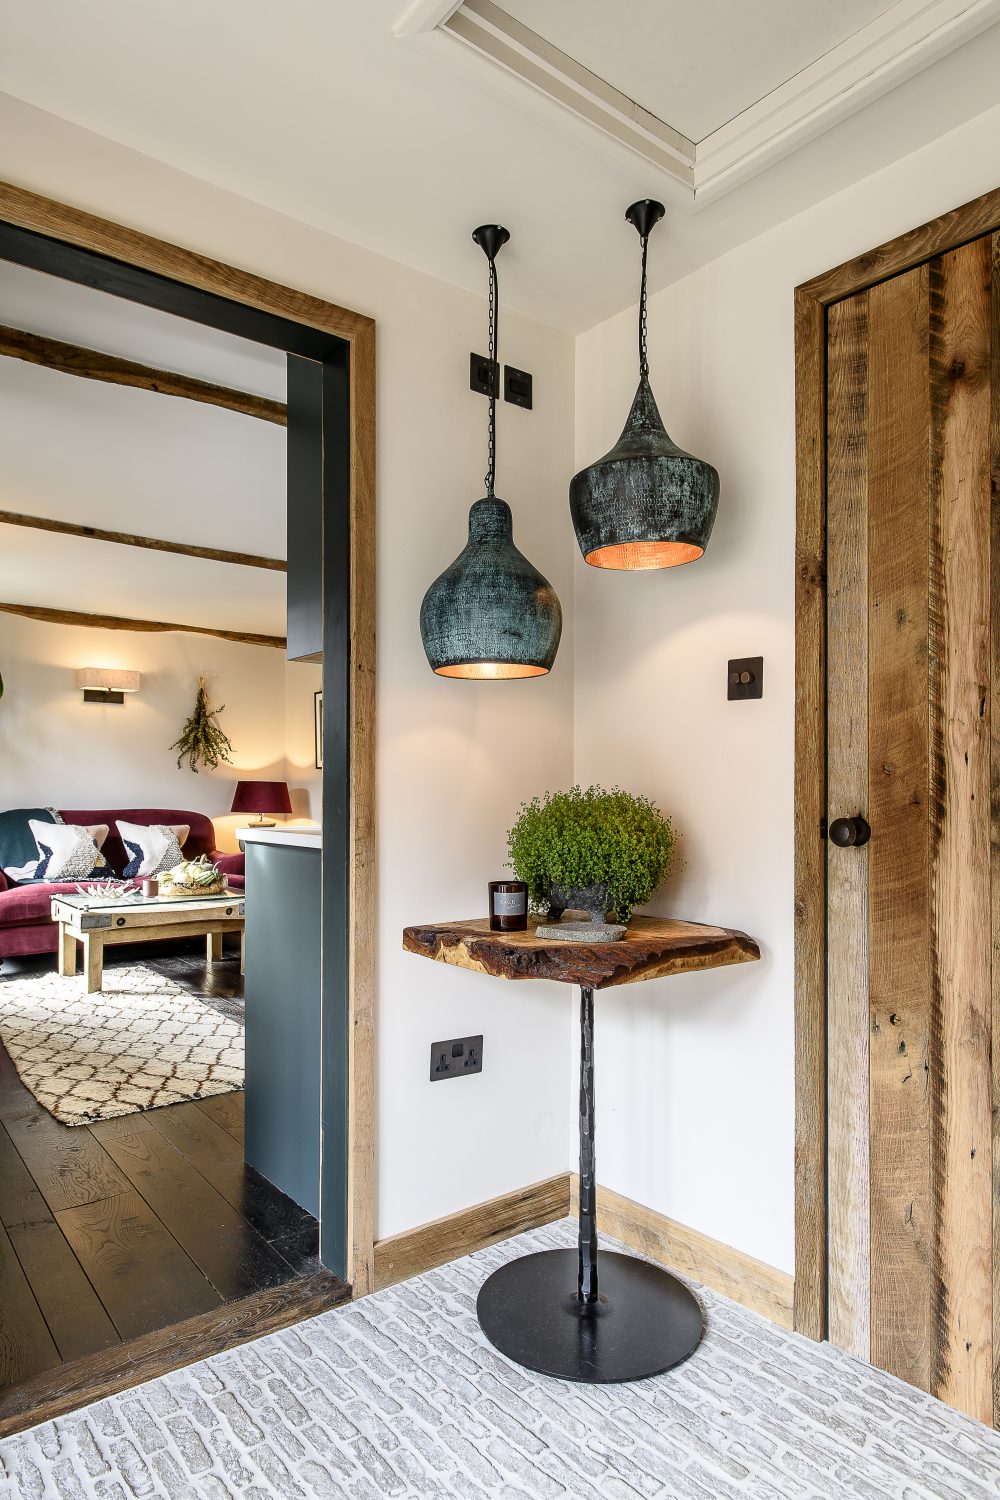 “All the doors are made from reclaimed Mississippi oak floorboards.” This gives them their rich warm colour and contrasts beautifully with the central section of the door frames, painted in a smokey blue